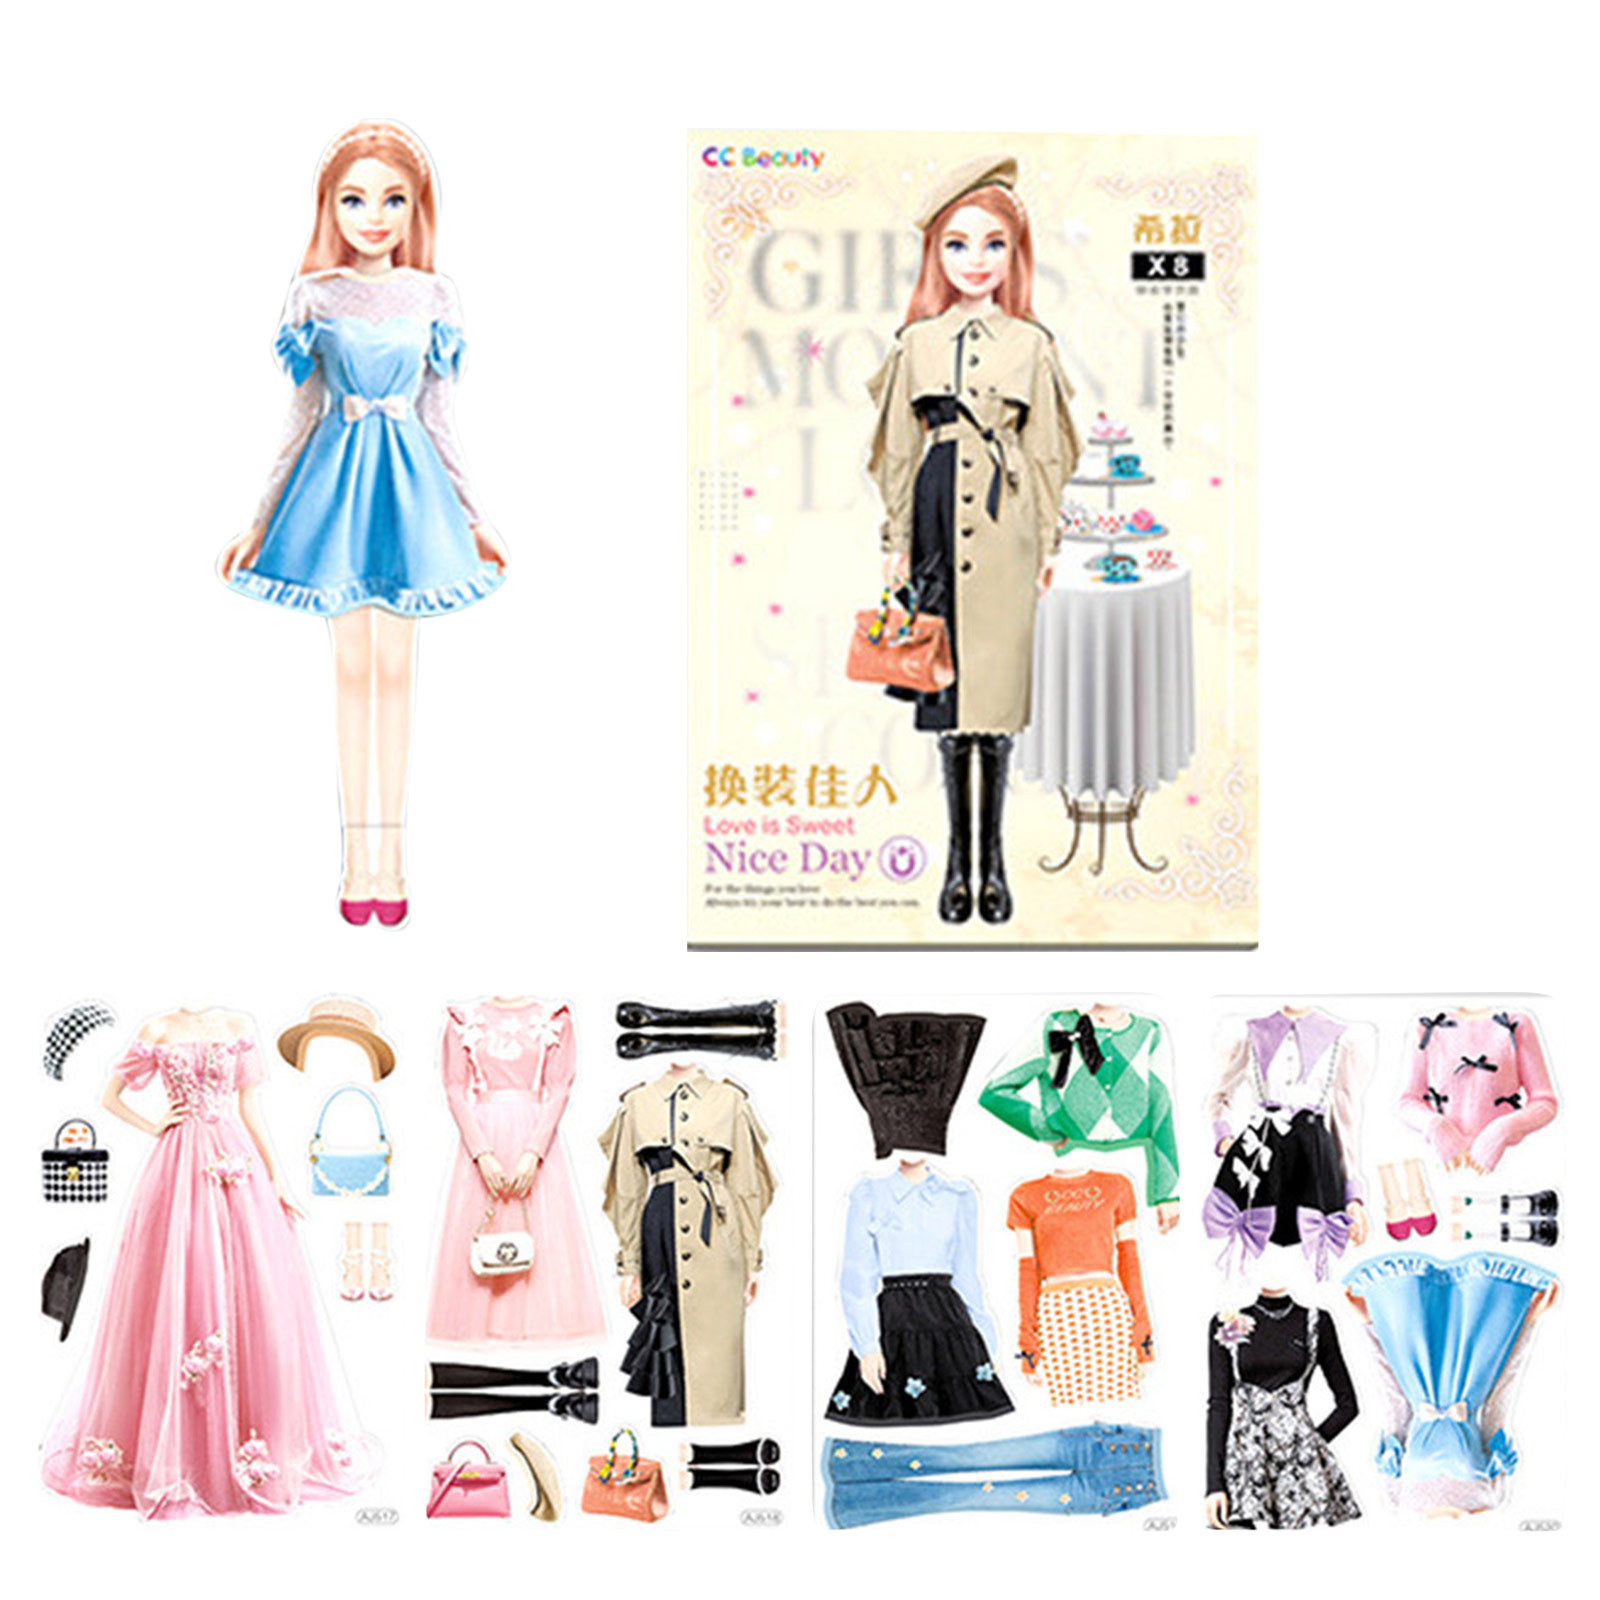 TUWABEII Games and Puzzles for Kids,Magnetic Dress Up Baby Magnetic Princess Dress Up Paper Doll Magnet Dress Up Pretend And Play Travel Playset Toy Magnetic Dress Up Dolls For Girls Kid's Gift - image 1 of 7